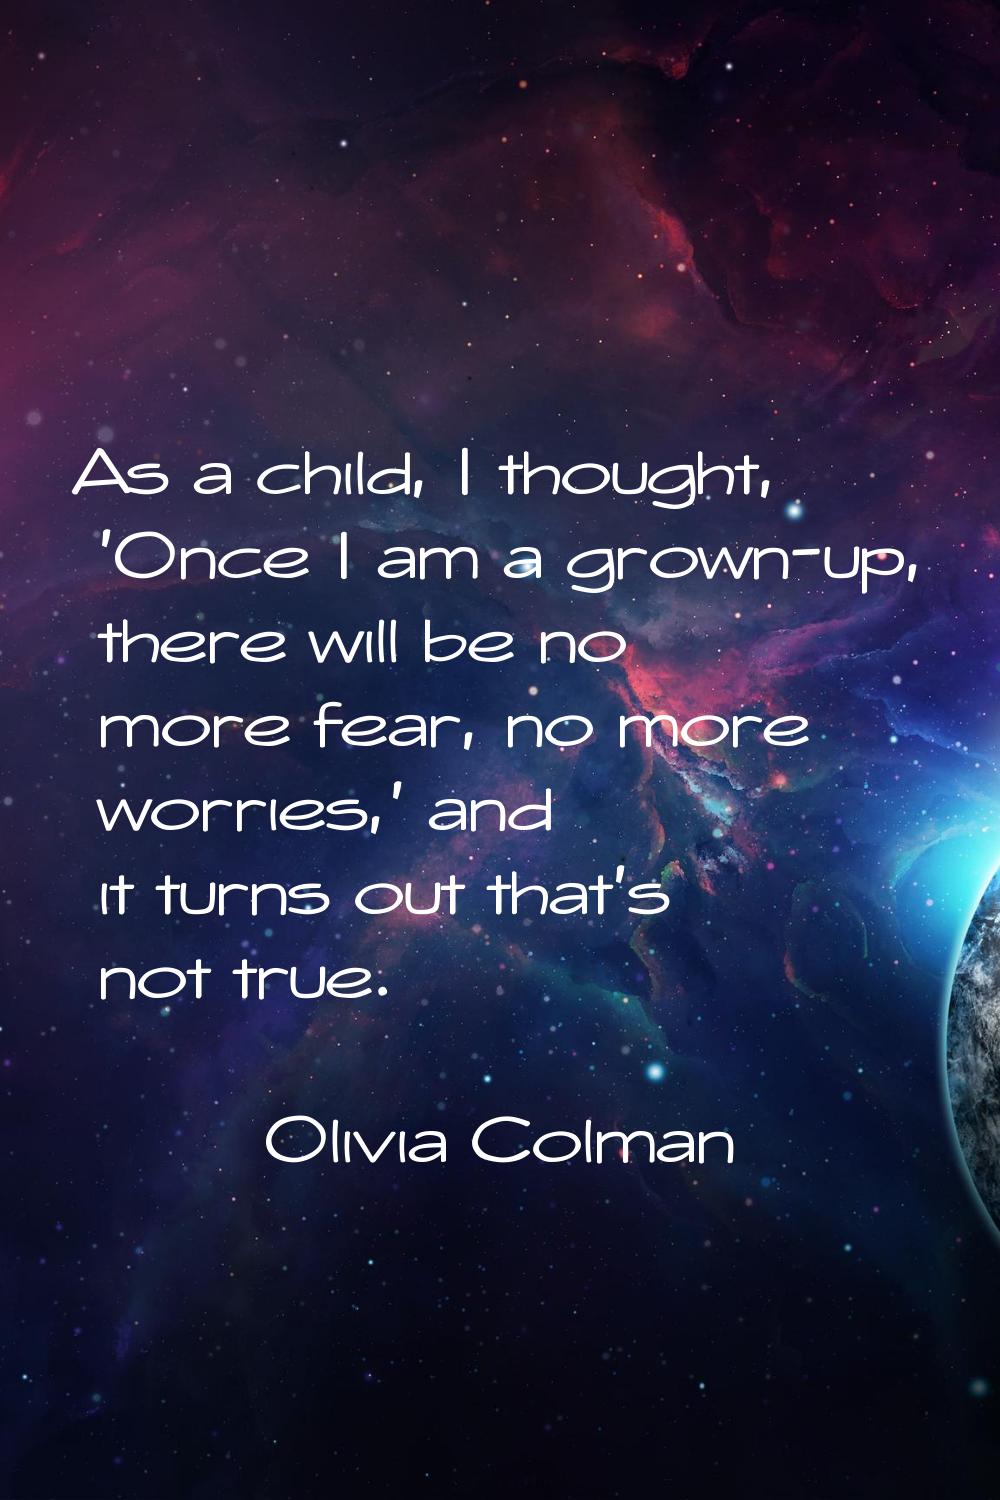 As a child, I thought, 'Once I am a grown-up, there will be no more fear, no more worries,' and it 